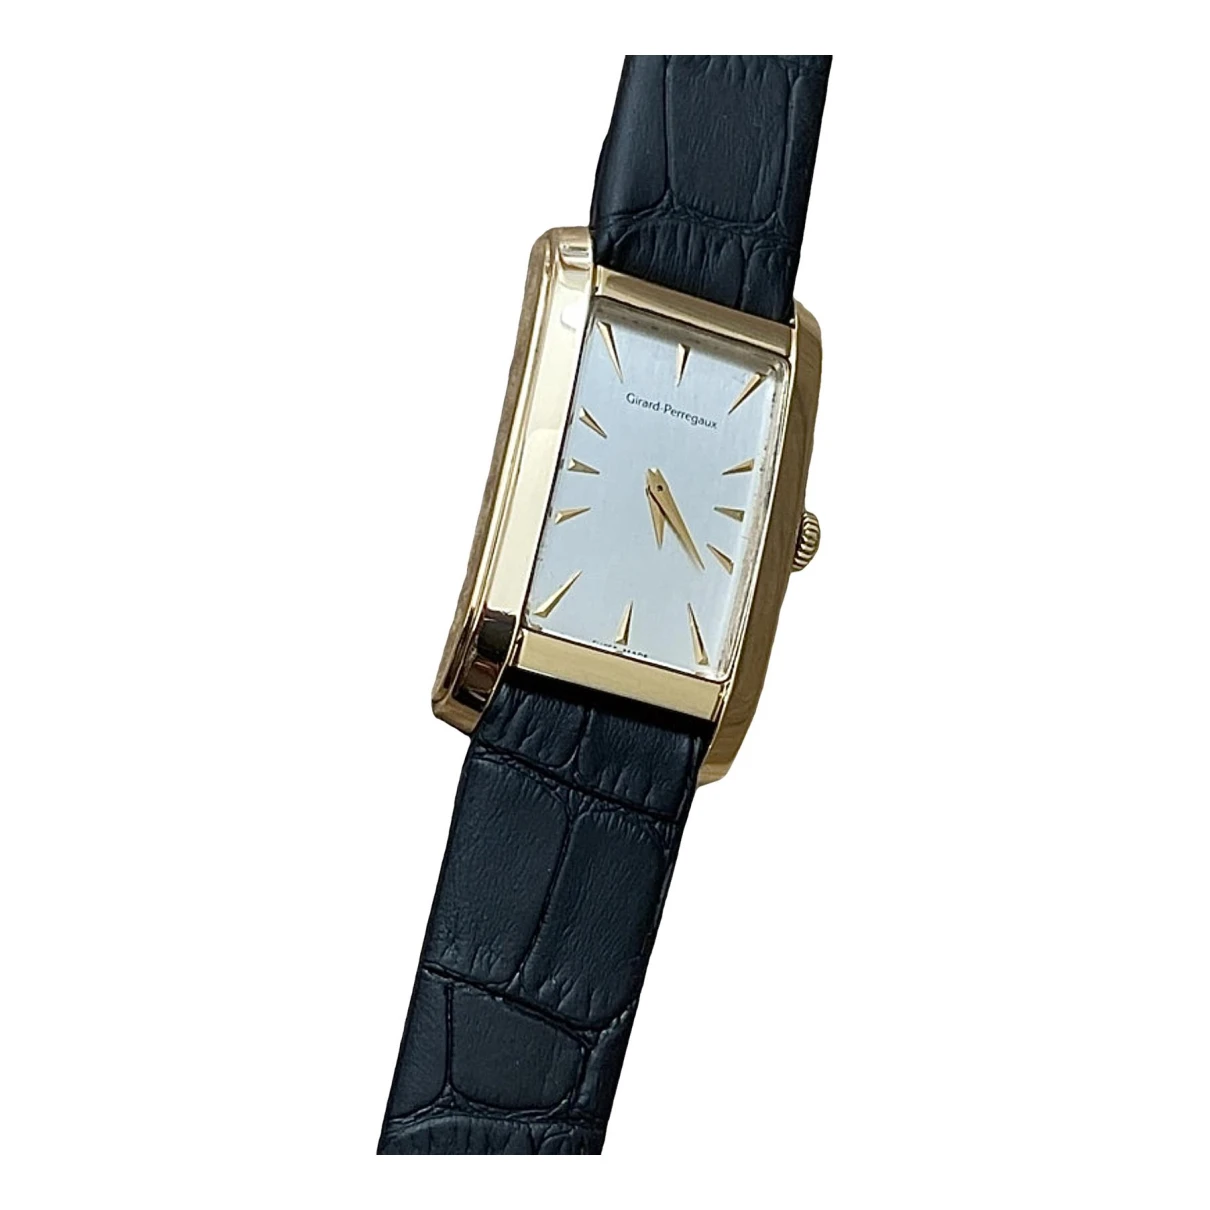 Pre-owned Girard-perregaux Gold Watch